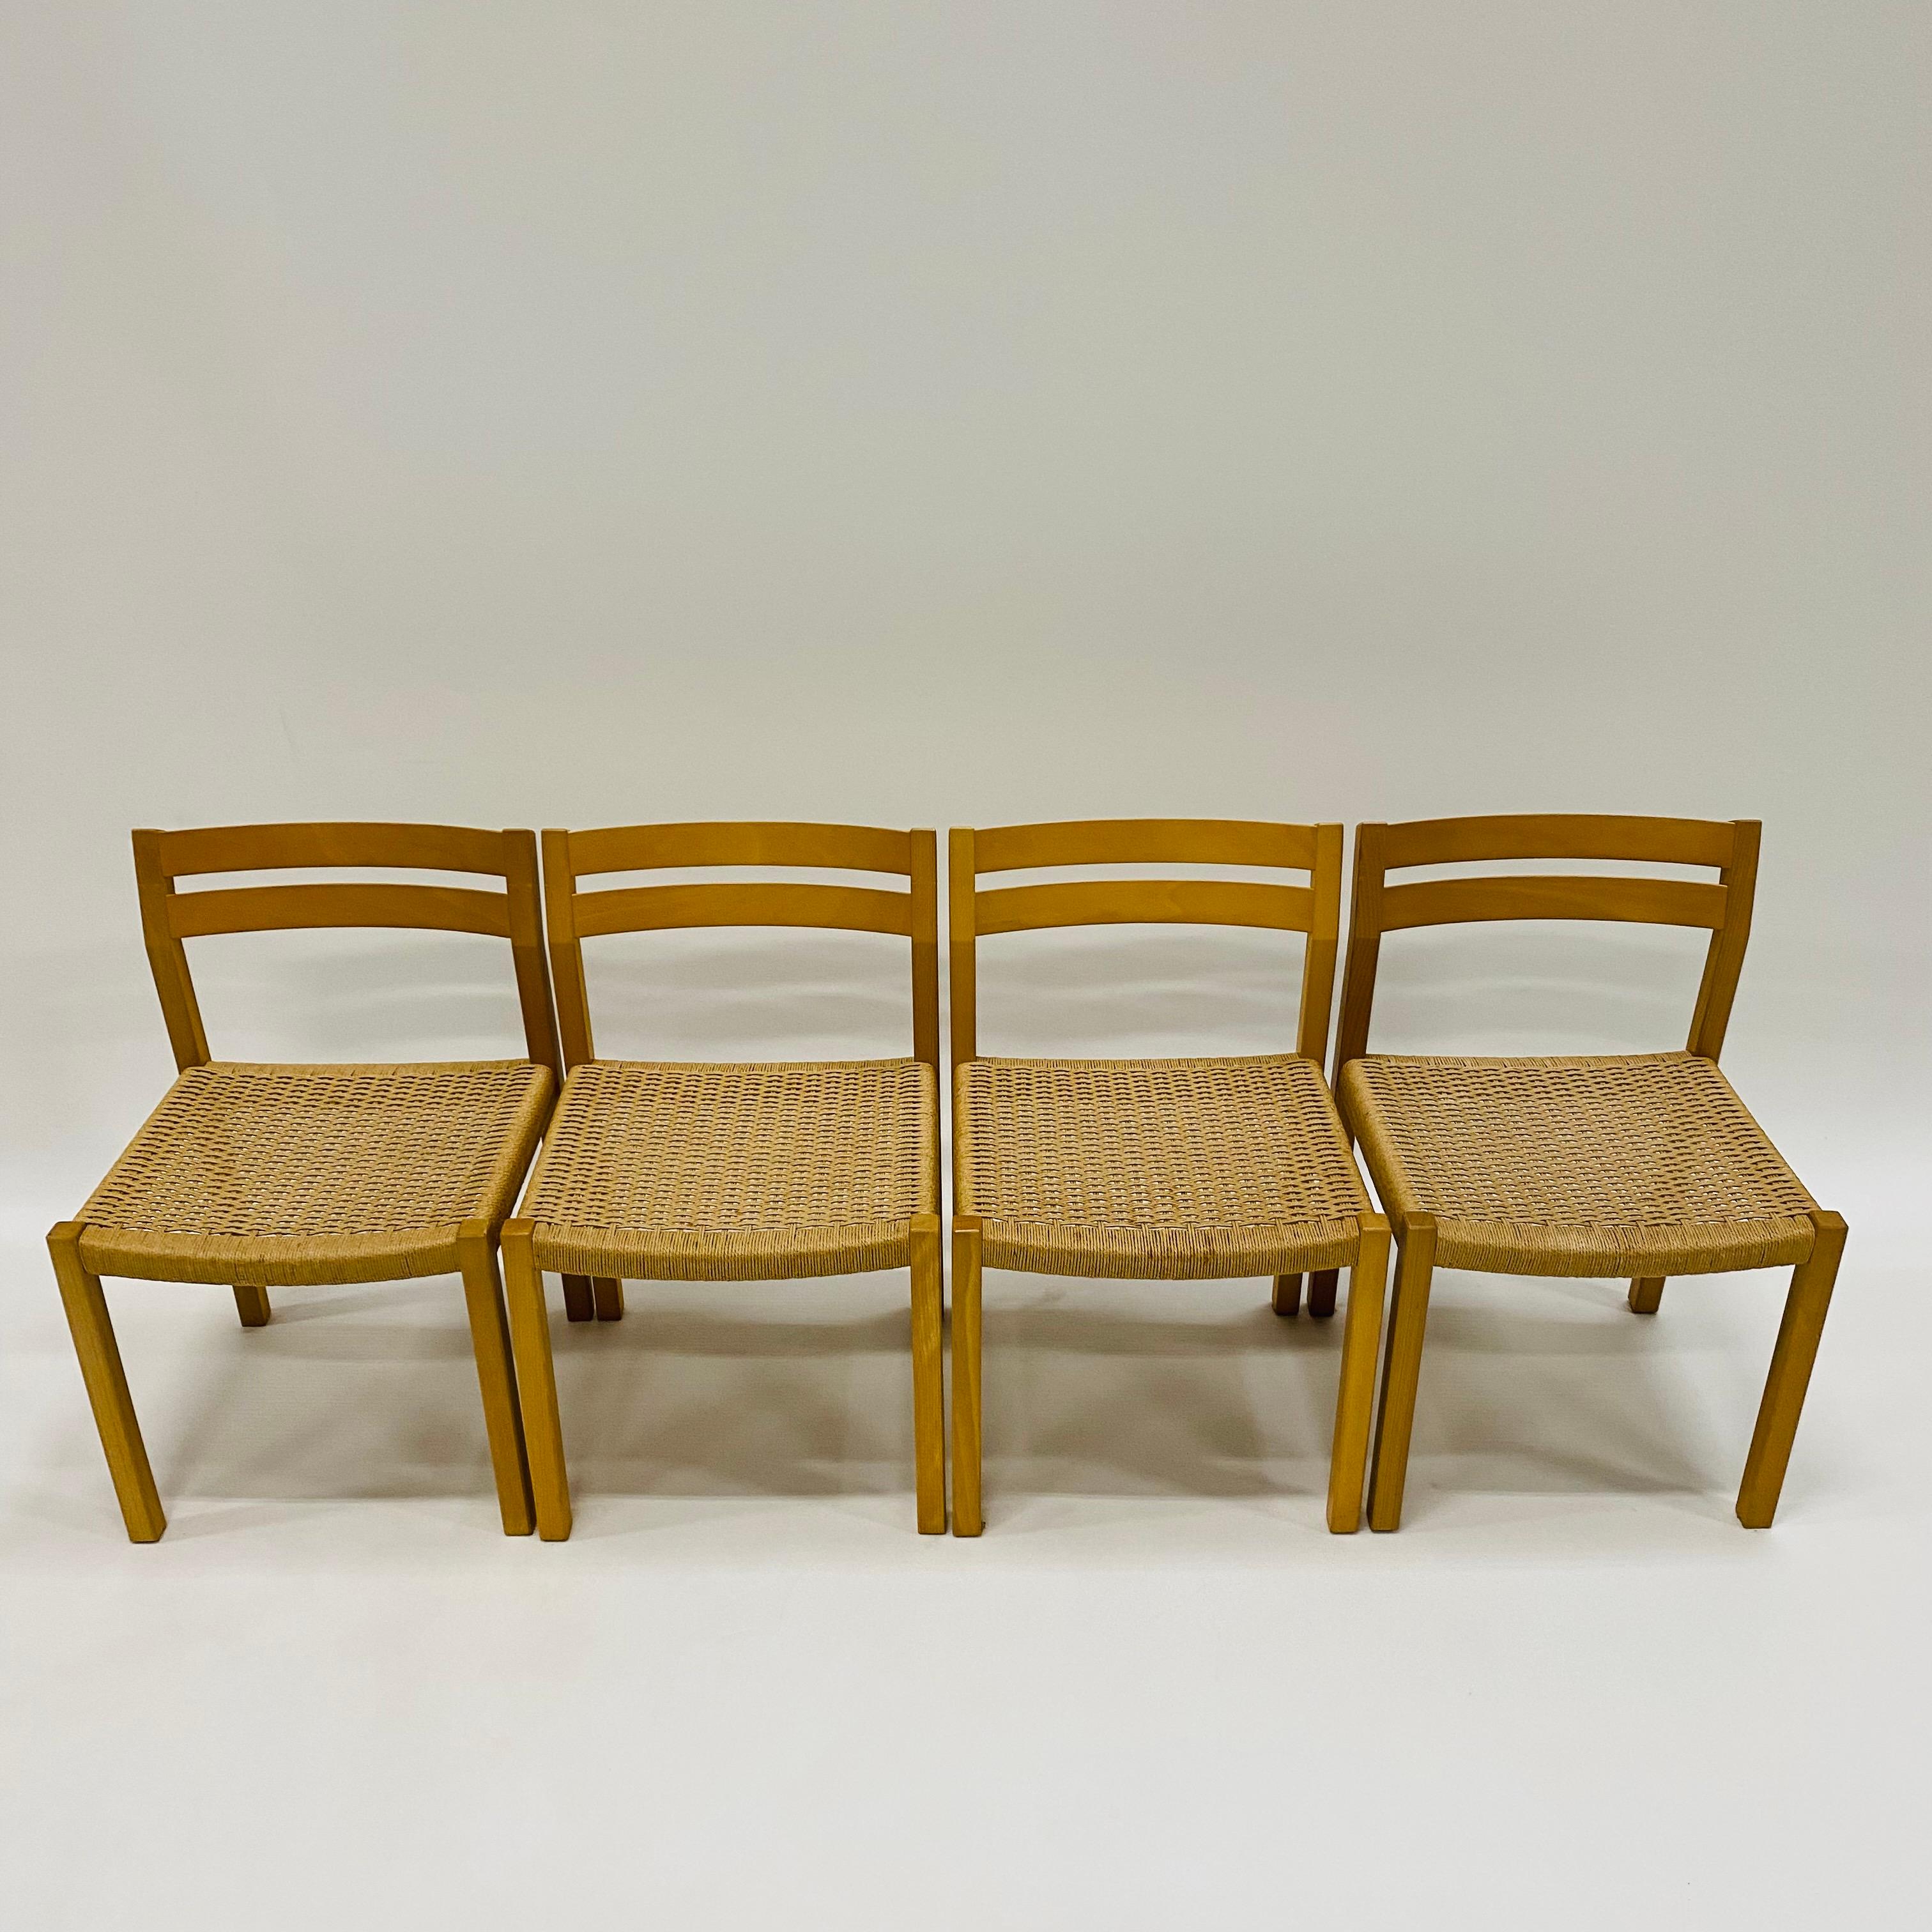 4 x J.L. Möller Papercord Dining Chairs by Niels O. Möller Denmark 1970 For Sale 5